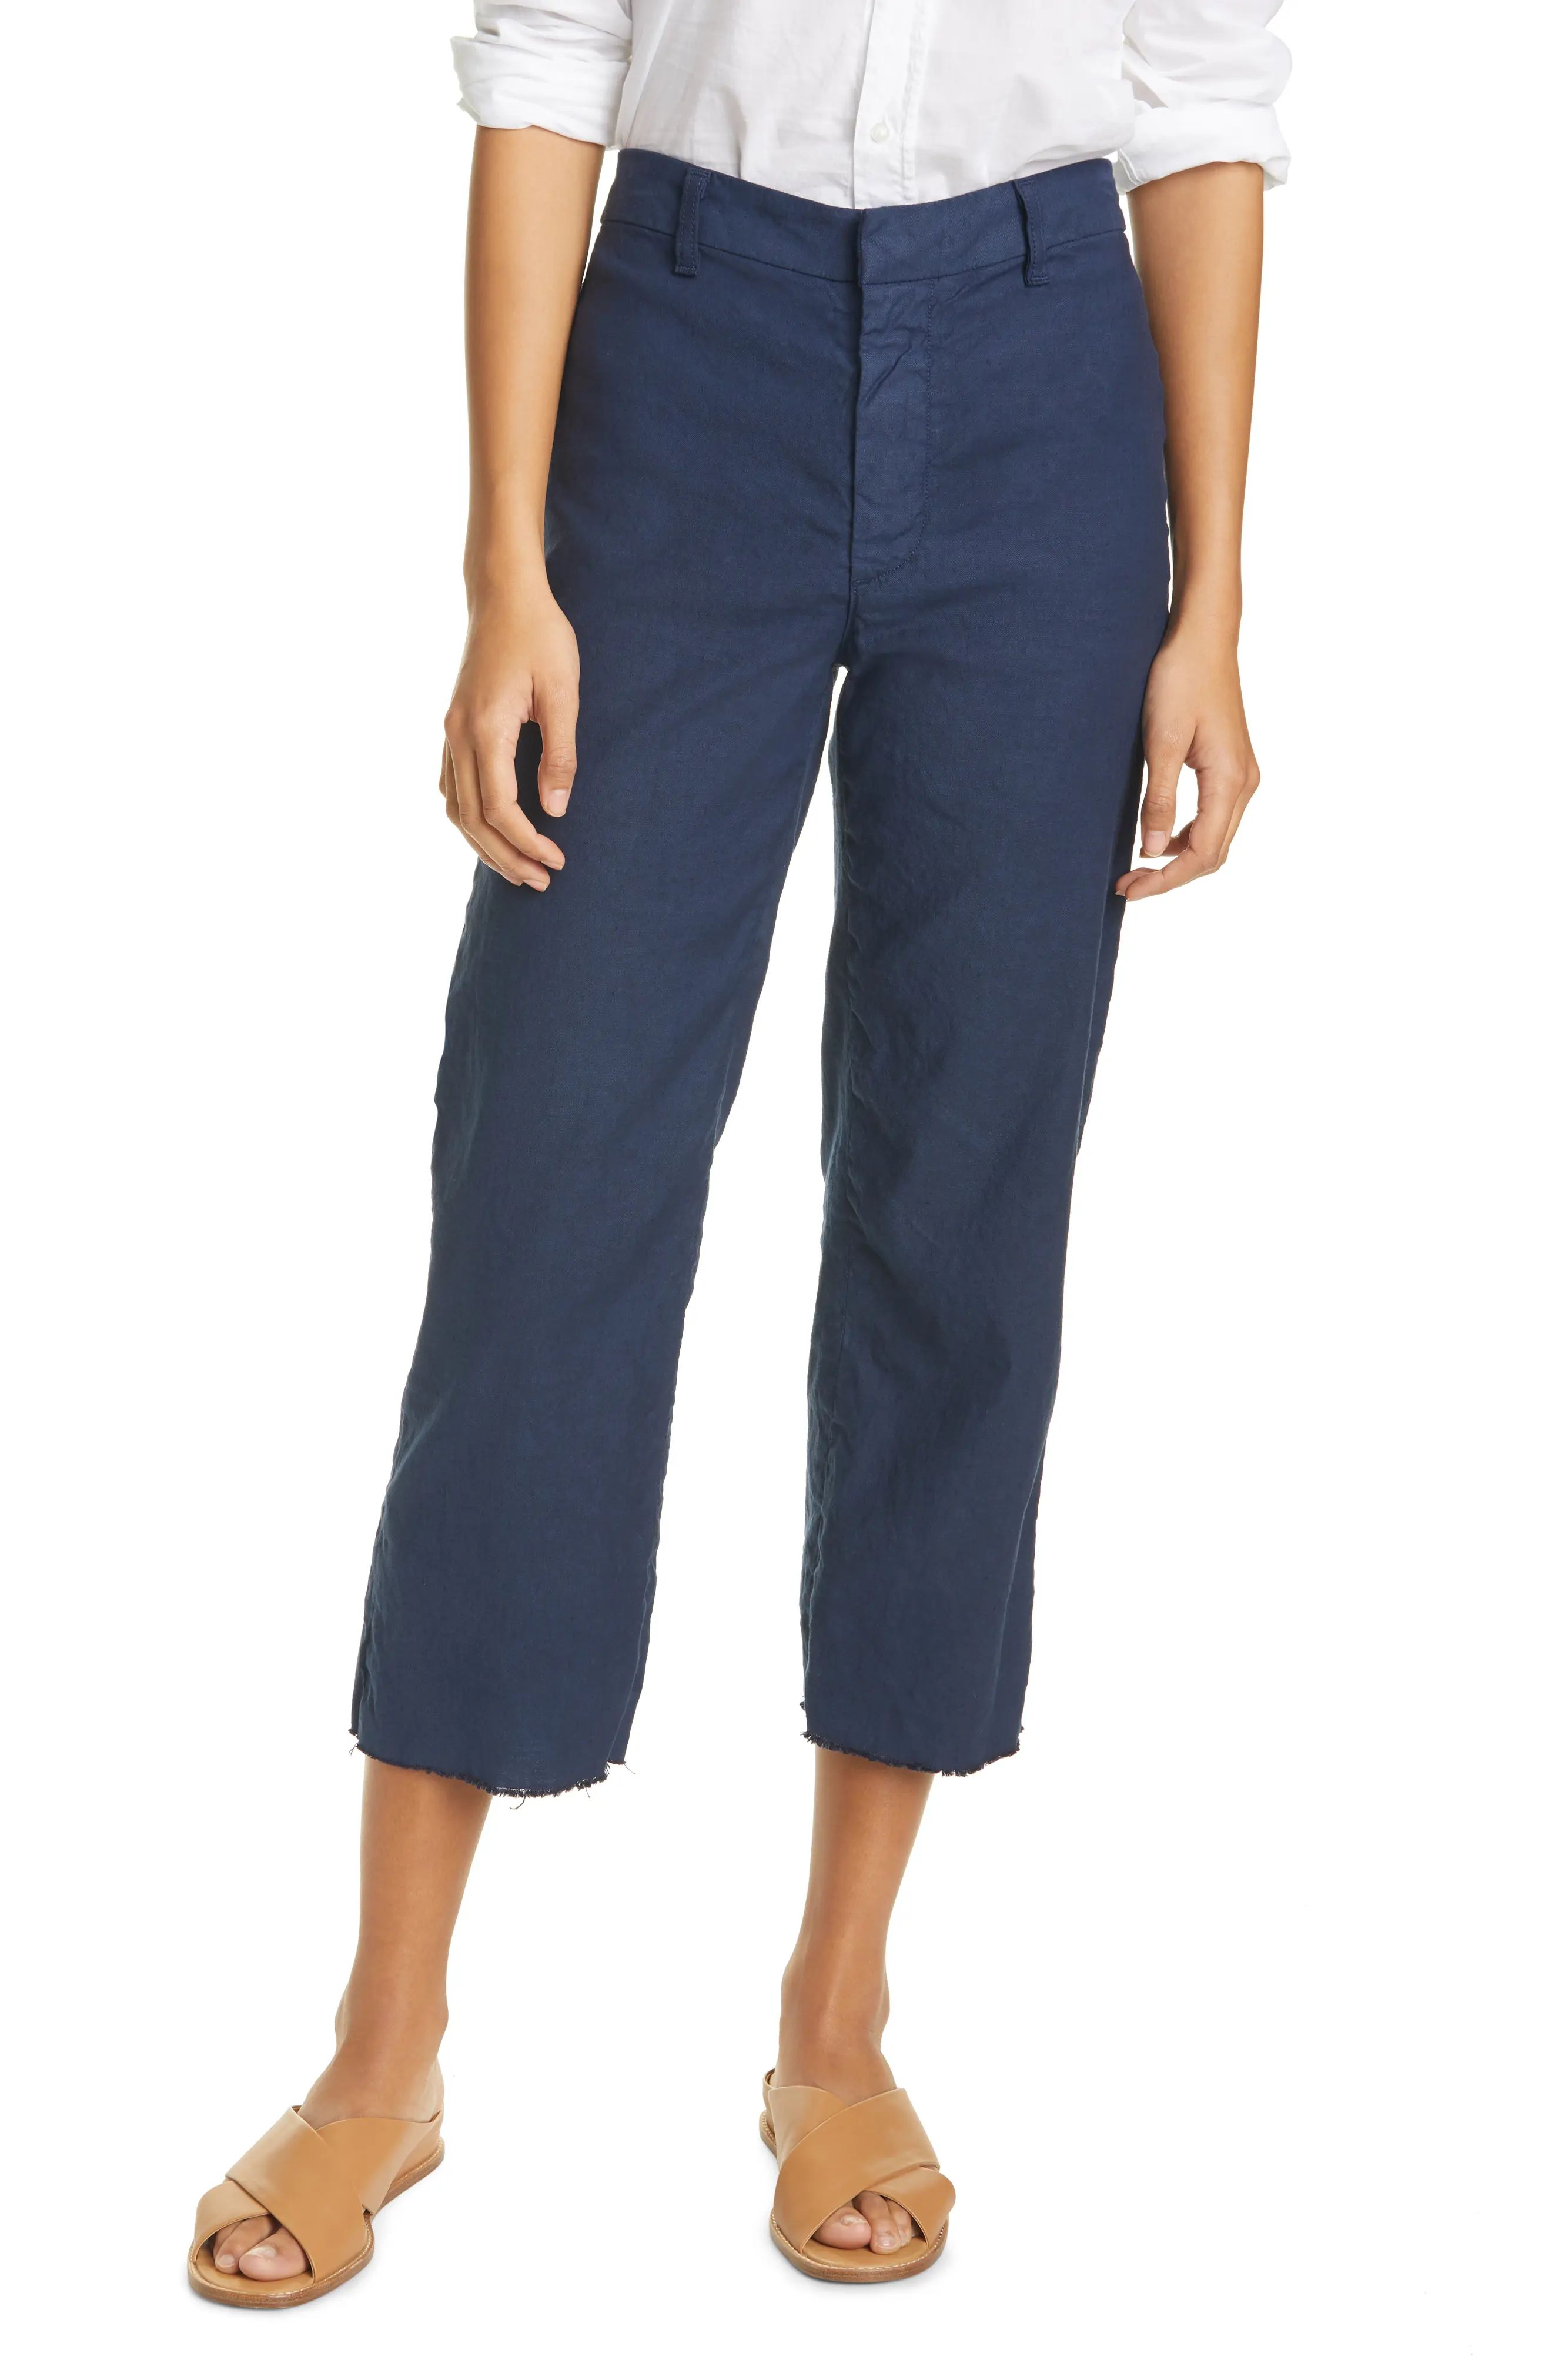 Frank & Eileen The Italian Crop Pants in Navy at Nordstrom, Size 2 | Nordstrom